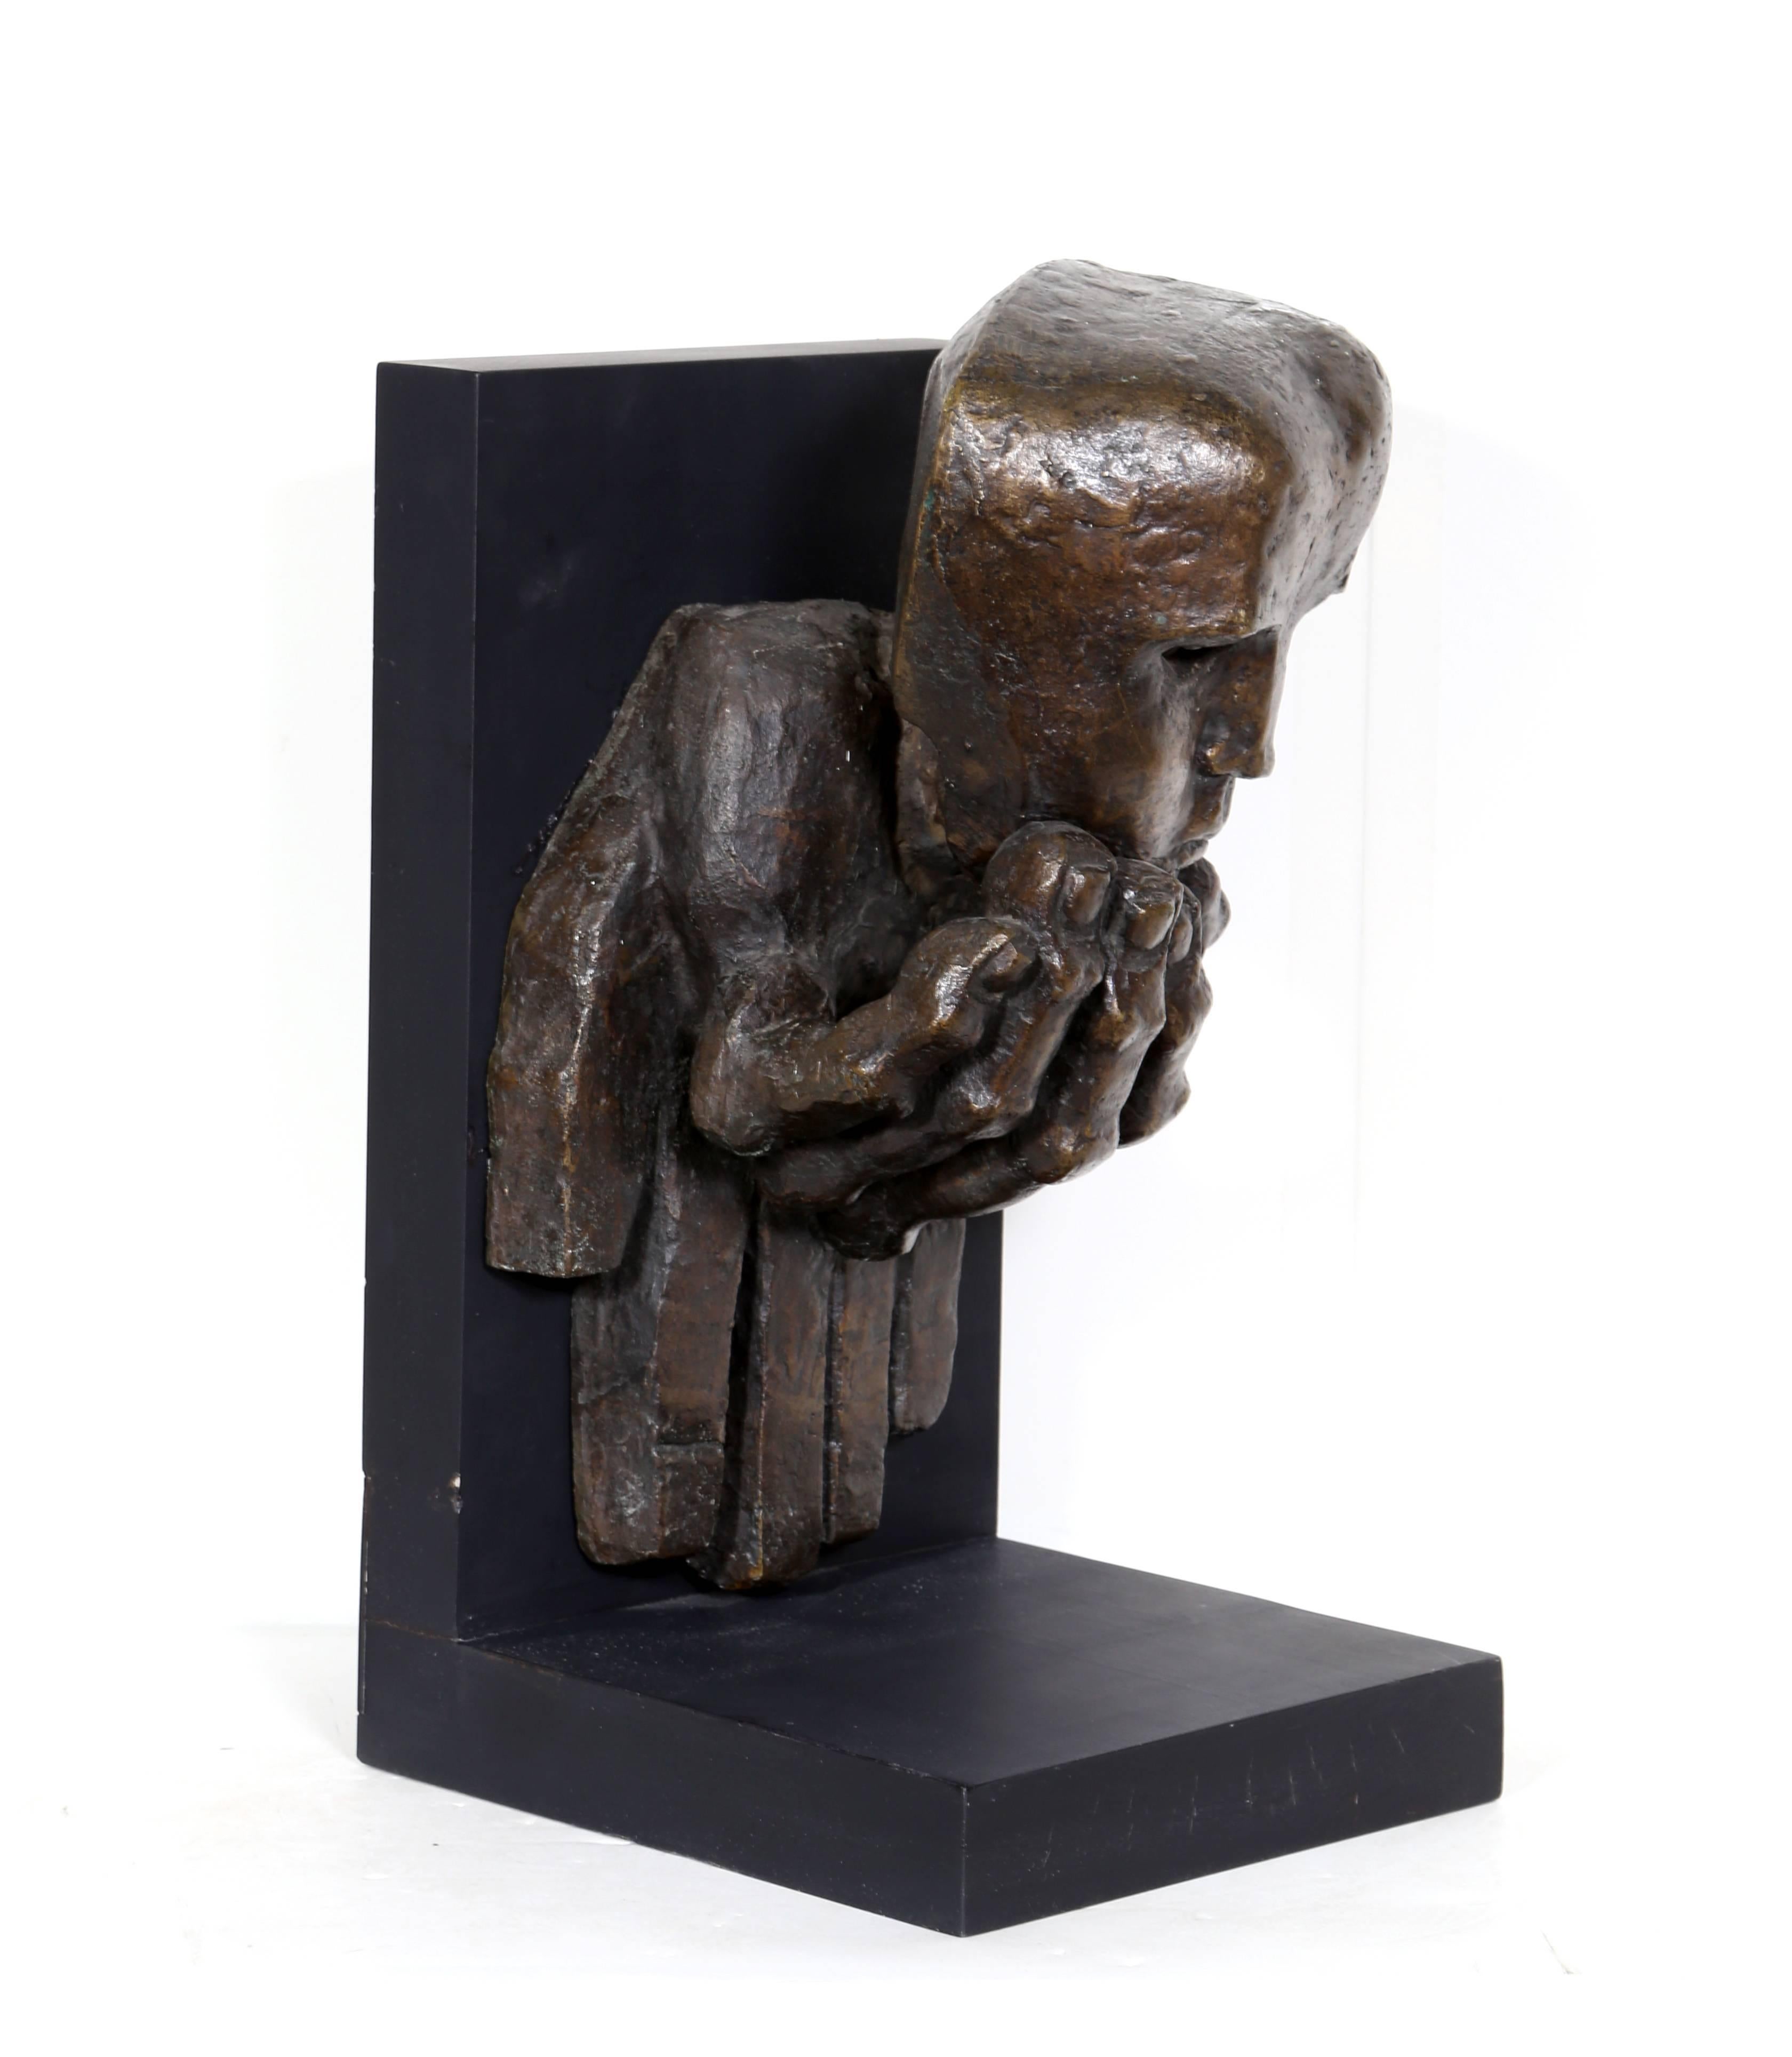 Artist: Ernst Neizvestny, Russian (1926 - ) 
Title: Monument in Honor of Dead
Year: 1970-1974 
Medium: Bronze Sculpture on Wooden Base
Edition: 7 + AP's
Size: 16  x 10  x 6.5 in. (40.64  x 25.4  x 16.51 cm)
Overall Height with Base: 18 inches
